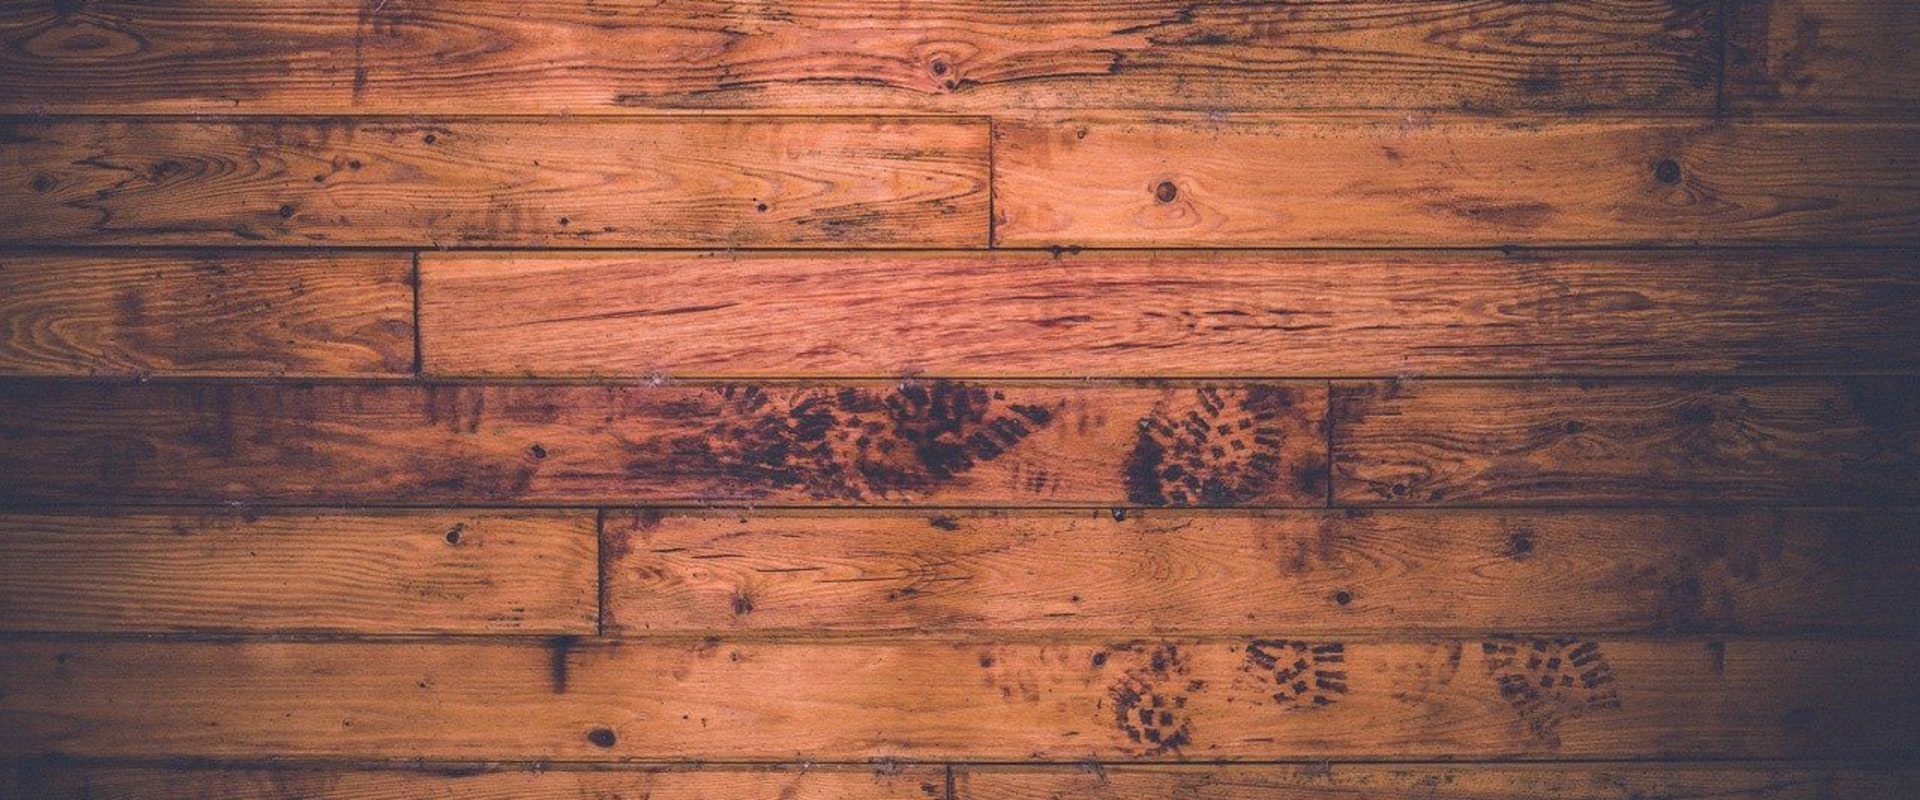 Debunking the Myths About Wooden Flooring